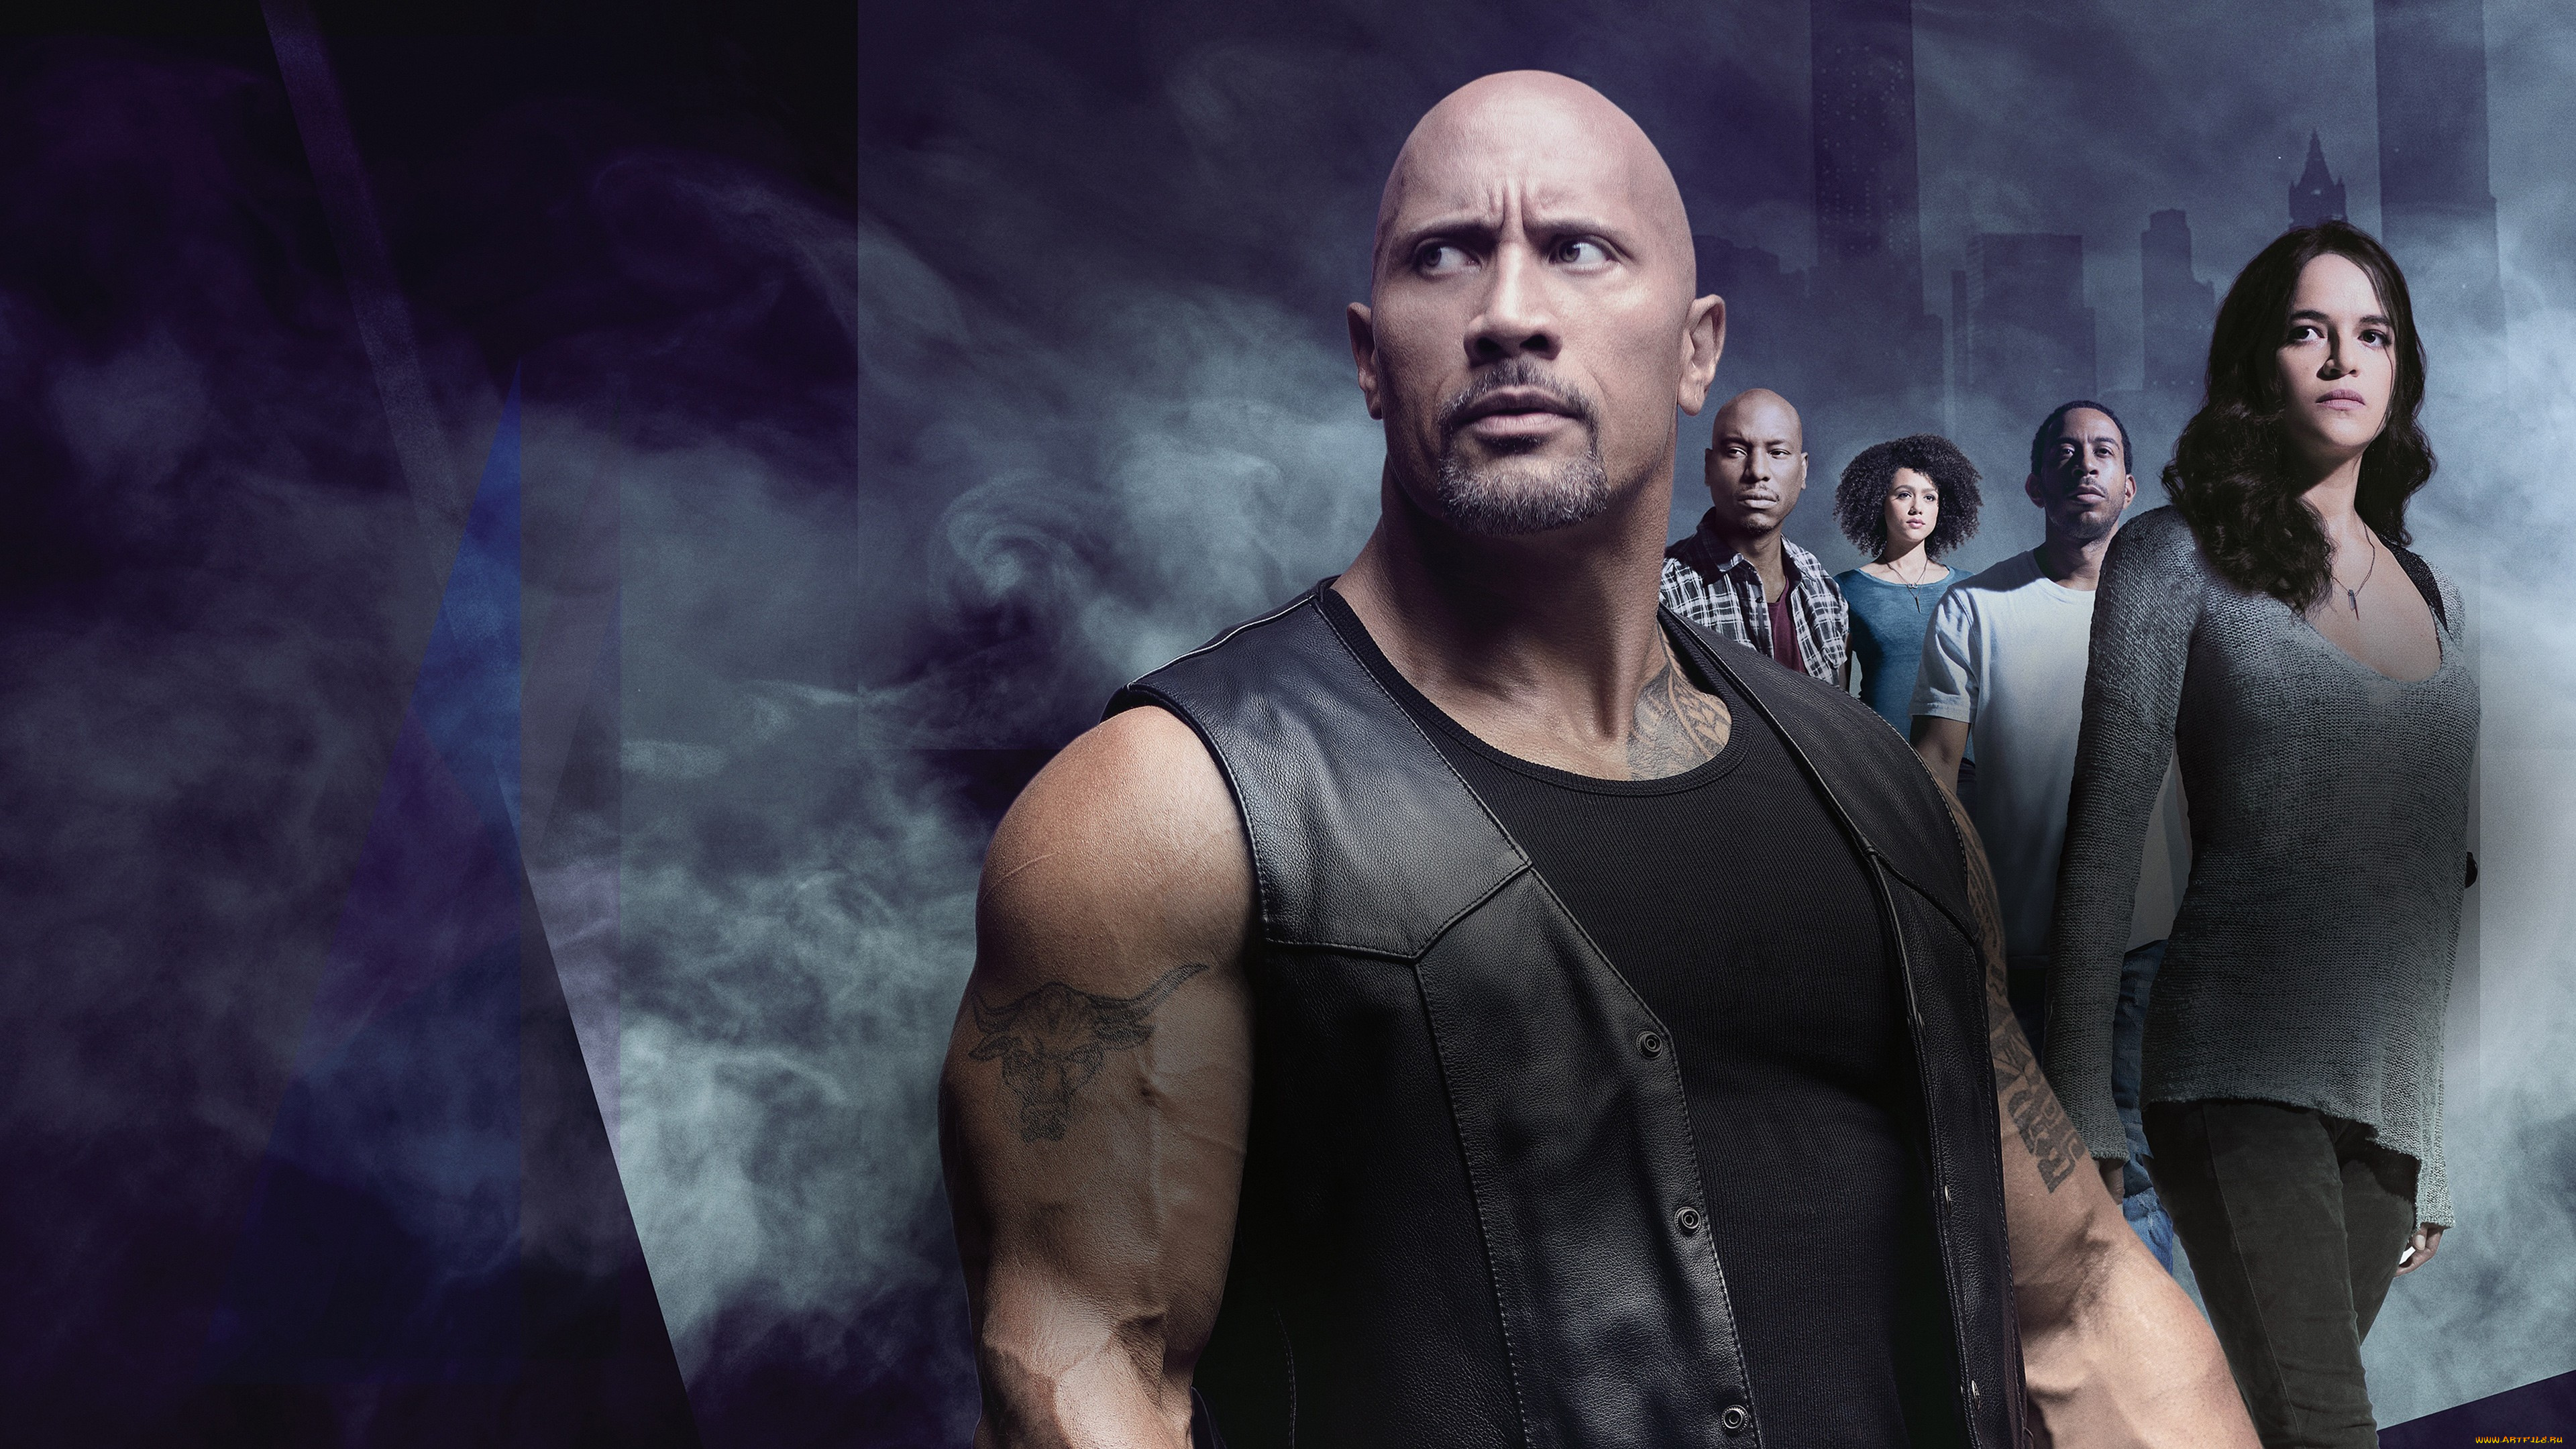 кино, фильмы, the, fate, of, the, furious, форсаж, the, fate, of, furious, 8, боевик, action